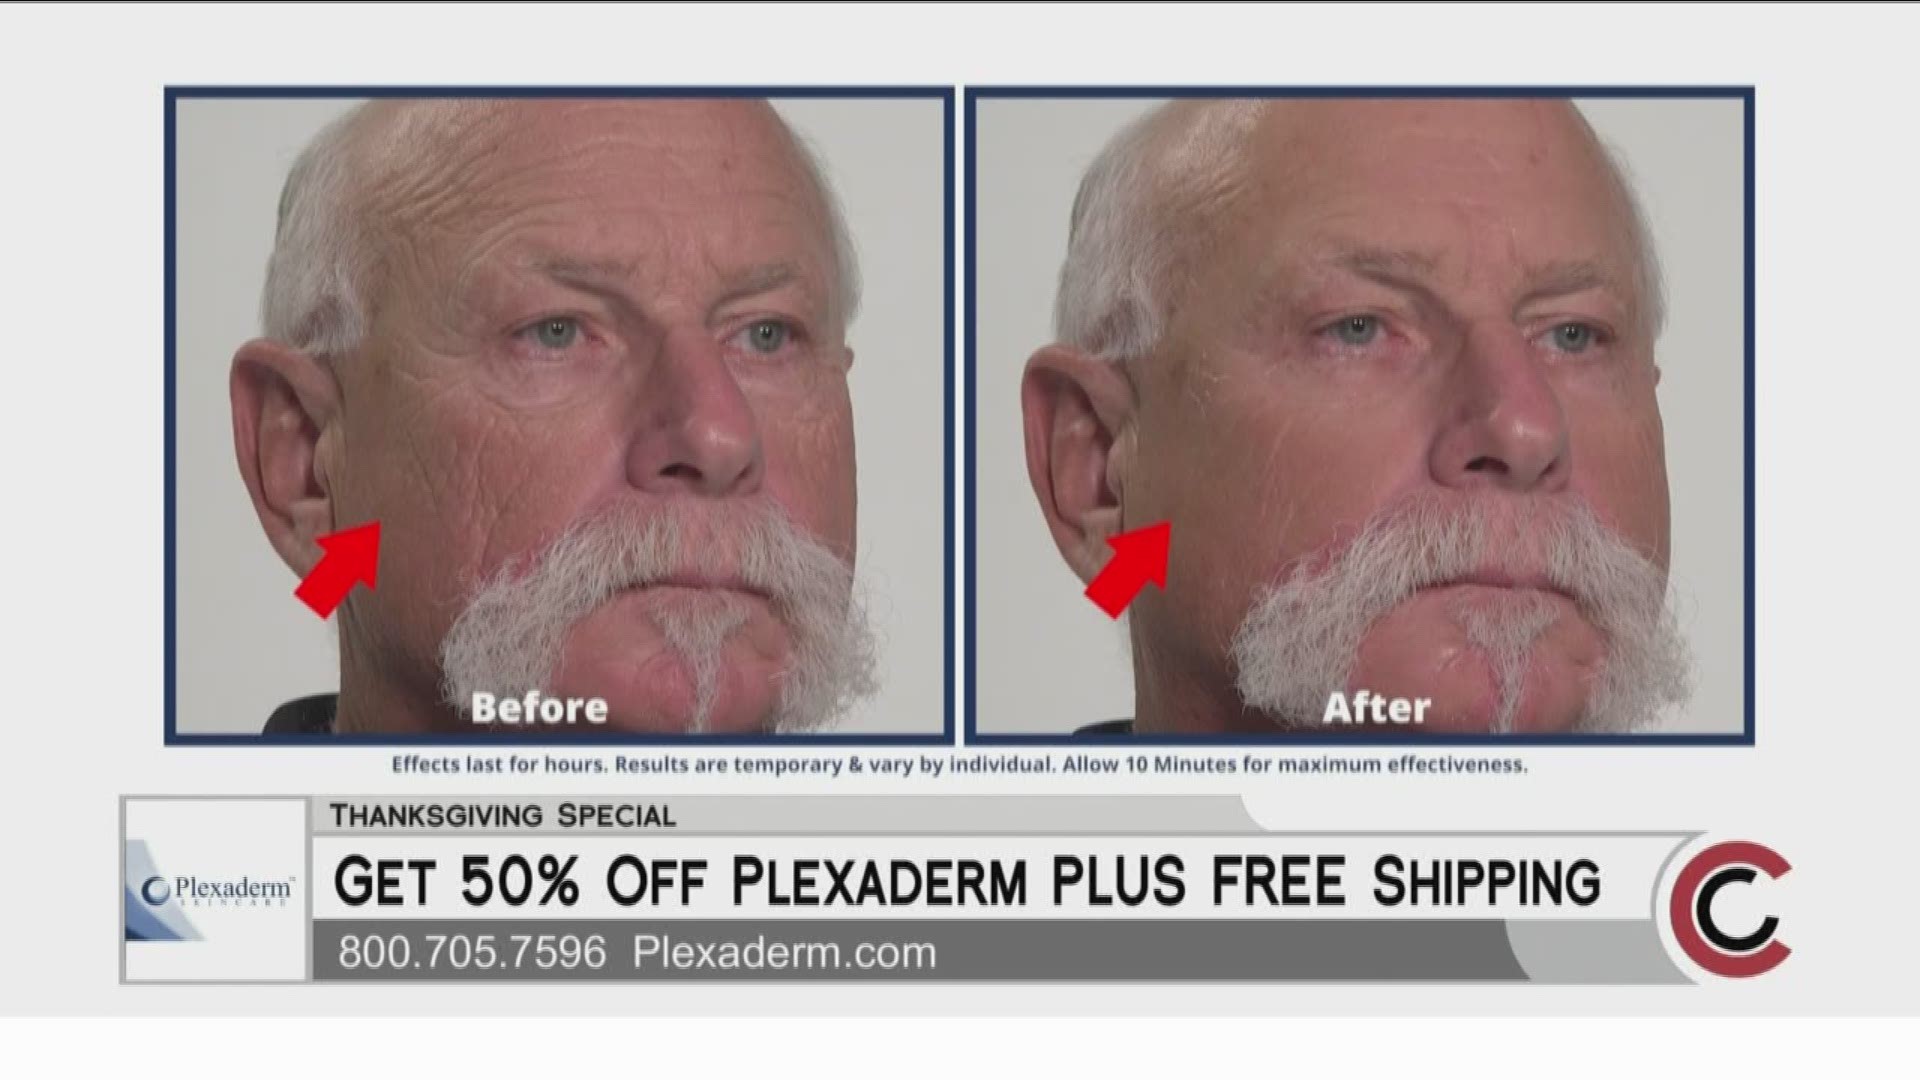 Take the 10-Minute Challenge and give Plexaderm a try. Right now you can get 50% off and free shipping! Call 800.705.7596, or visit www.Plexaderm.com.